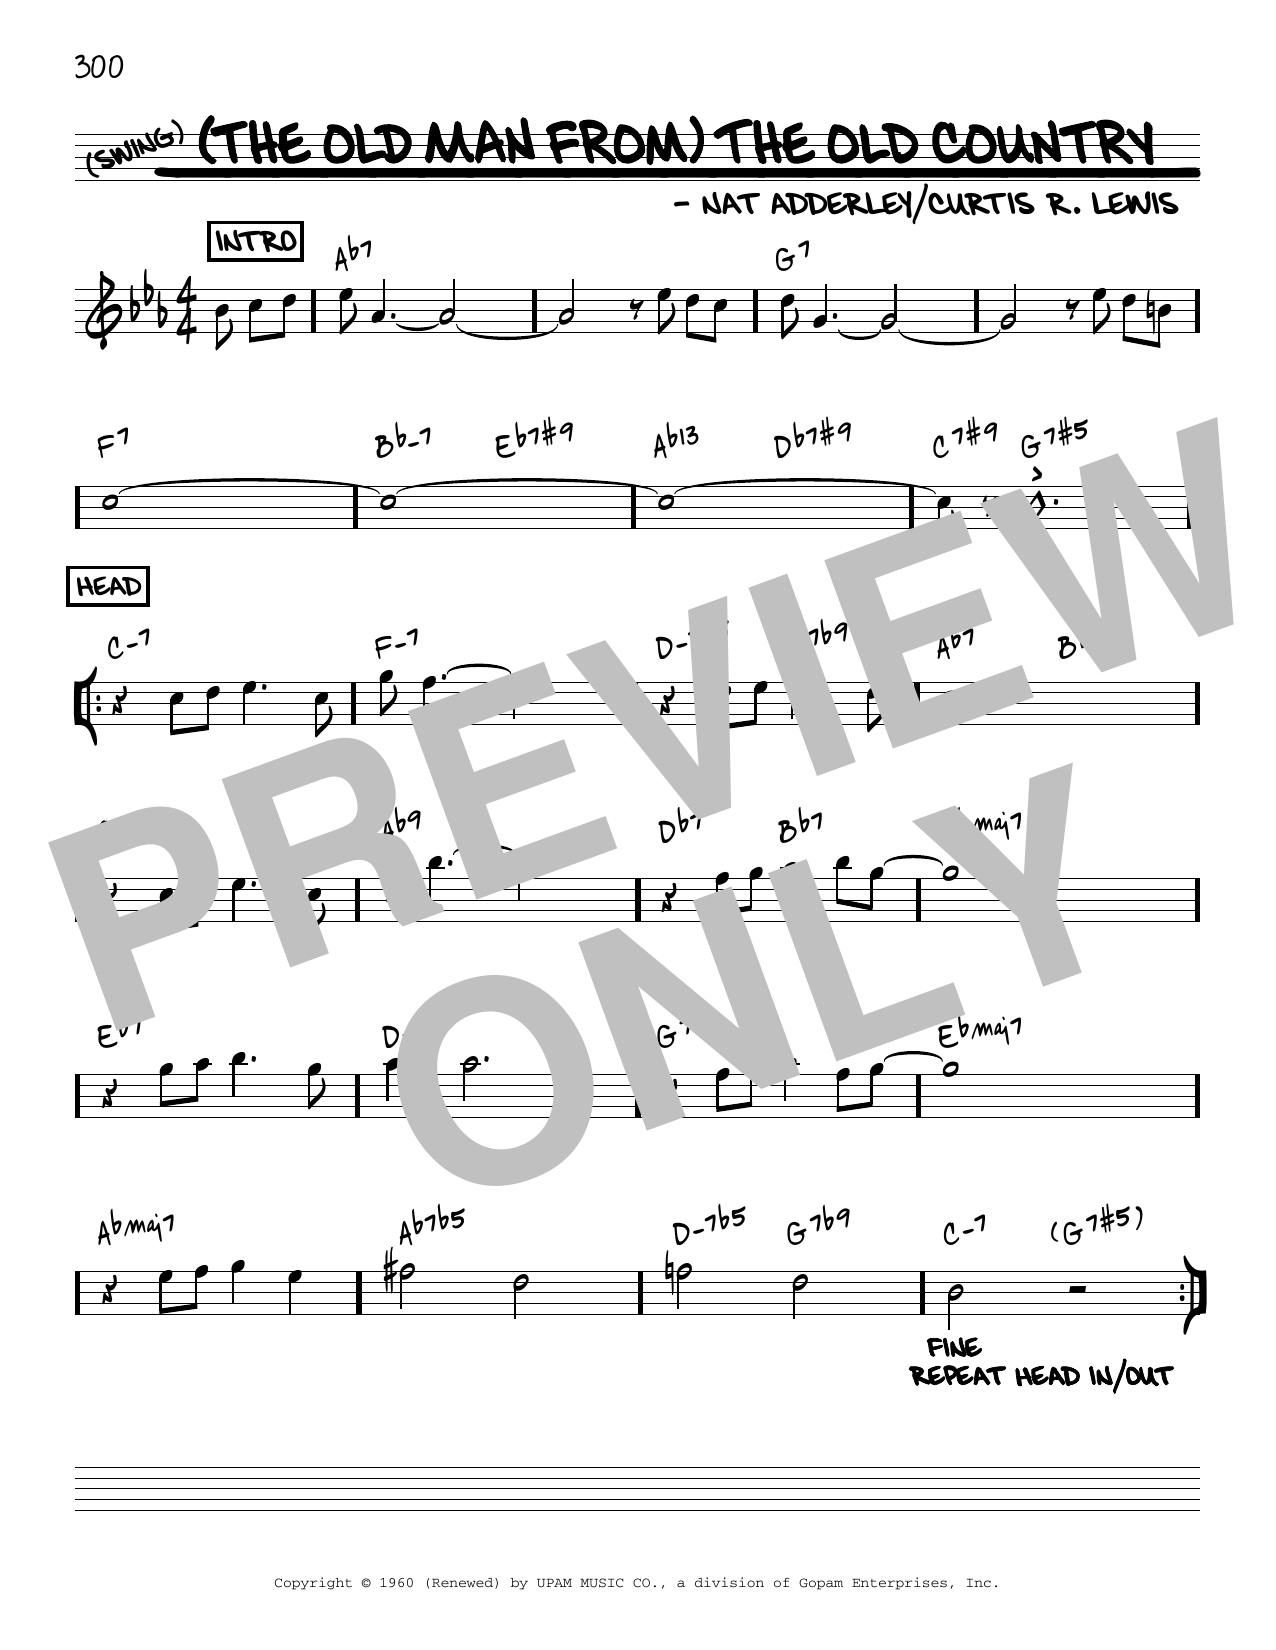 Download Nat Adderley (The Old Man From) The Old Country [Reh Sheet Music